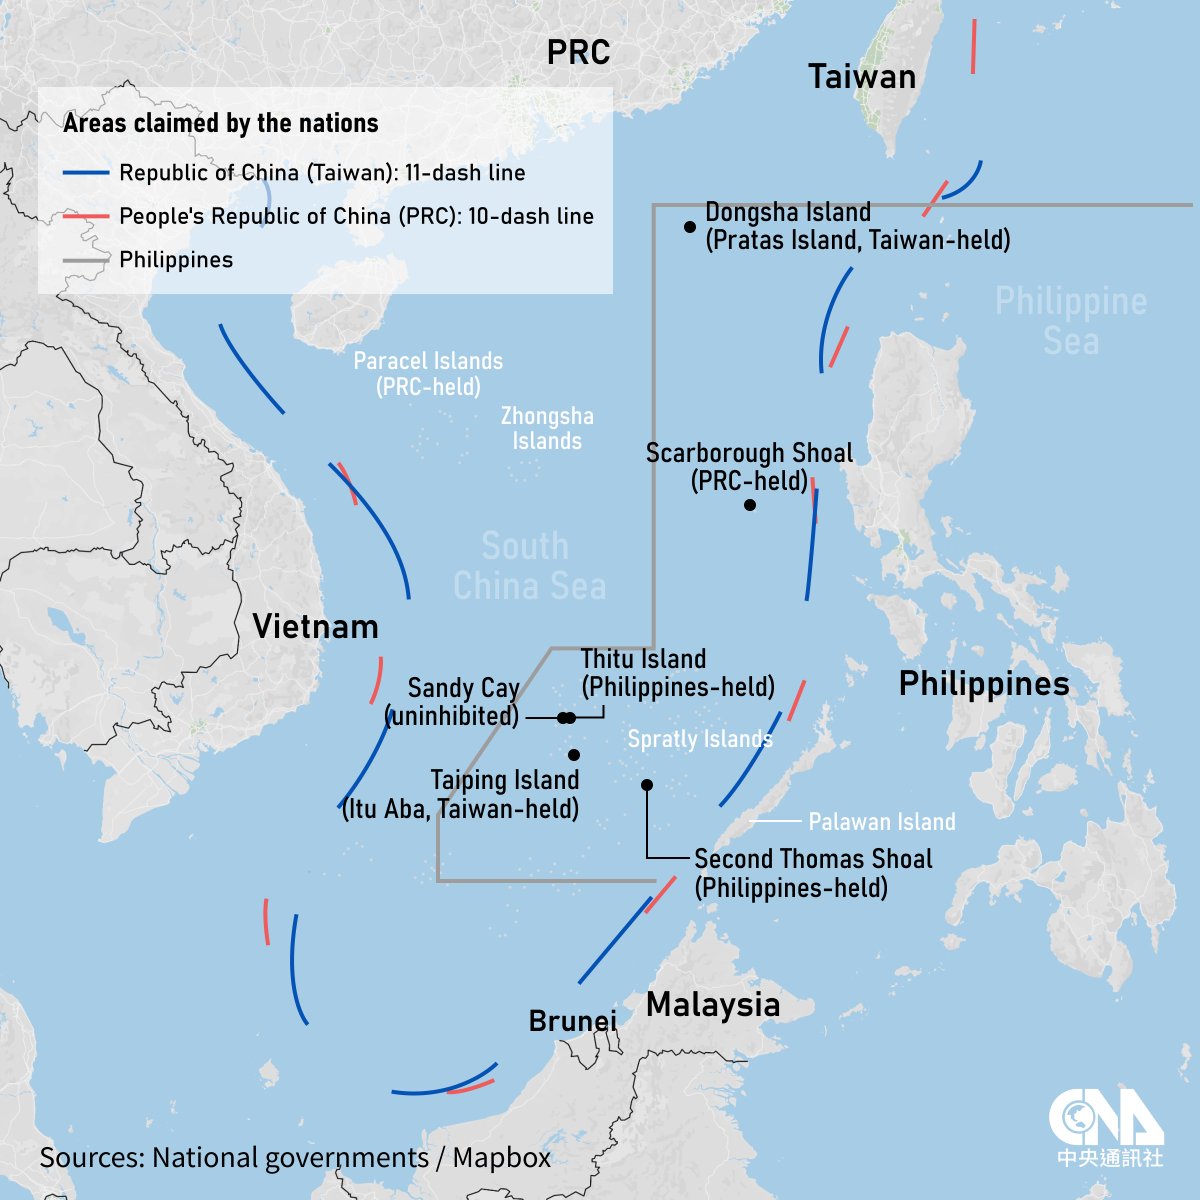 [ANALYSIS] A trip by opposition lawmakers to Taiping Island just 2 days before President-elect Lai Ching-te's inauguration on May 20 is aimed at challenging Lai to reiterate Taiwan's territorial claims & sovereignty, analysts believe. #SouthChinaSea focustaiwan.tw/cross-strait/2…